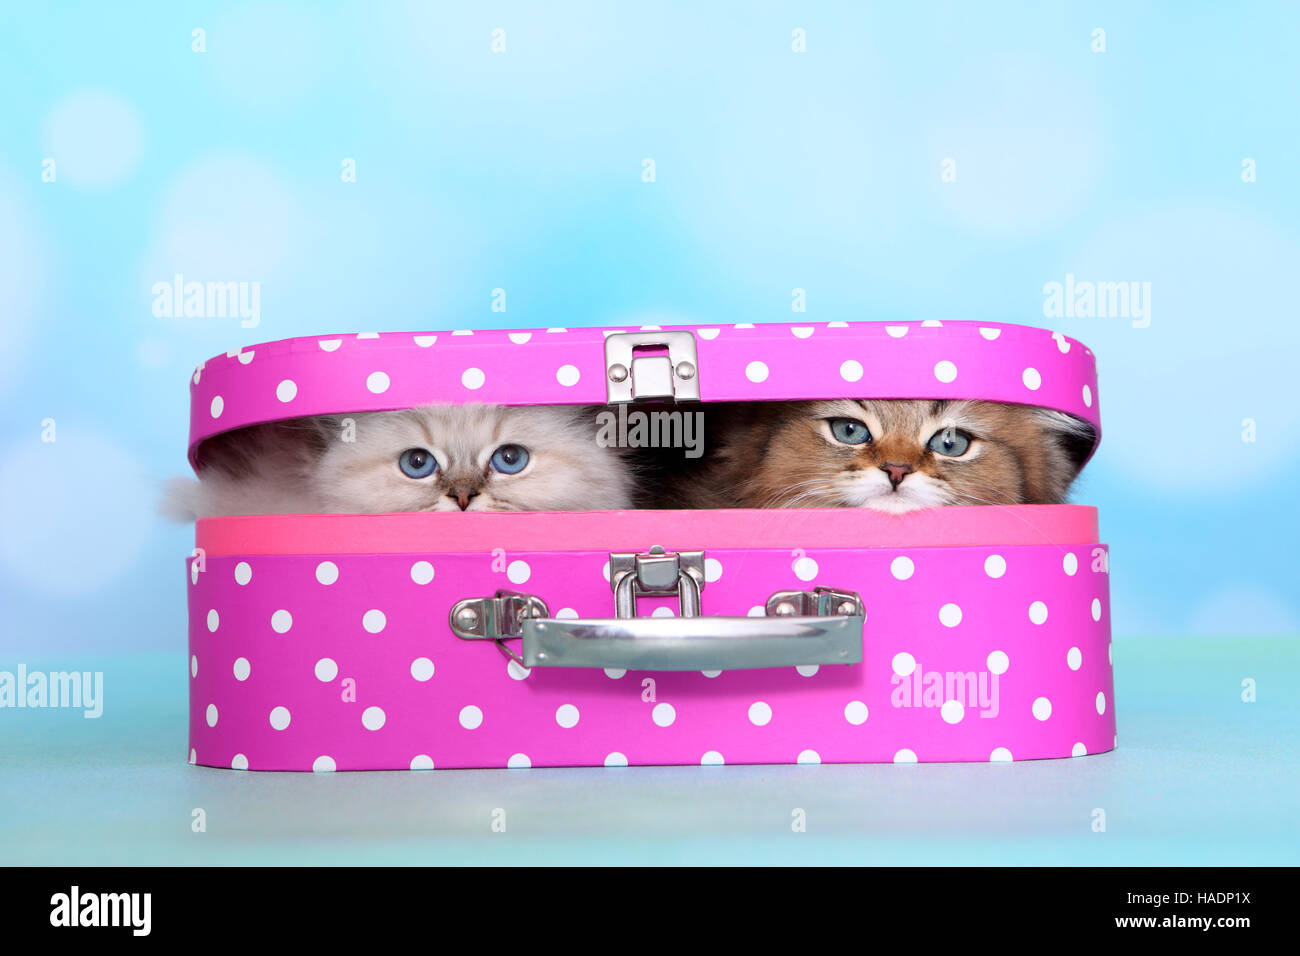 British Longhair. Two kittens (8 weeks old) in a pink suitcase with white polka dots. Studio picture against a blue background Stock Photo